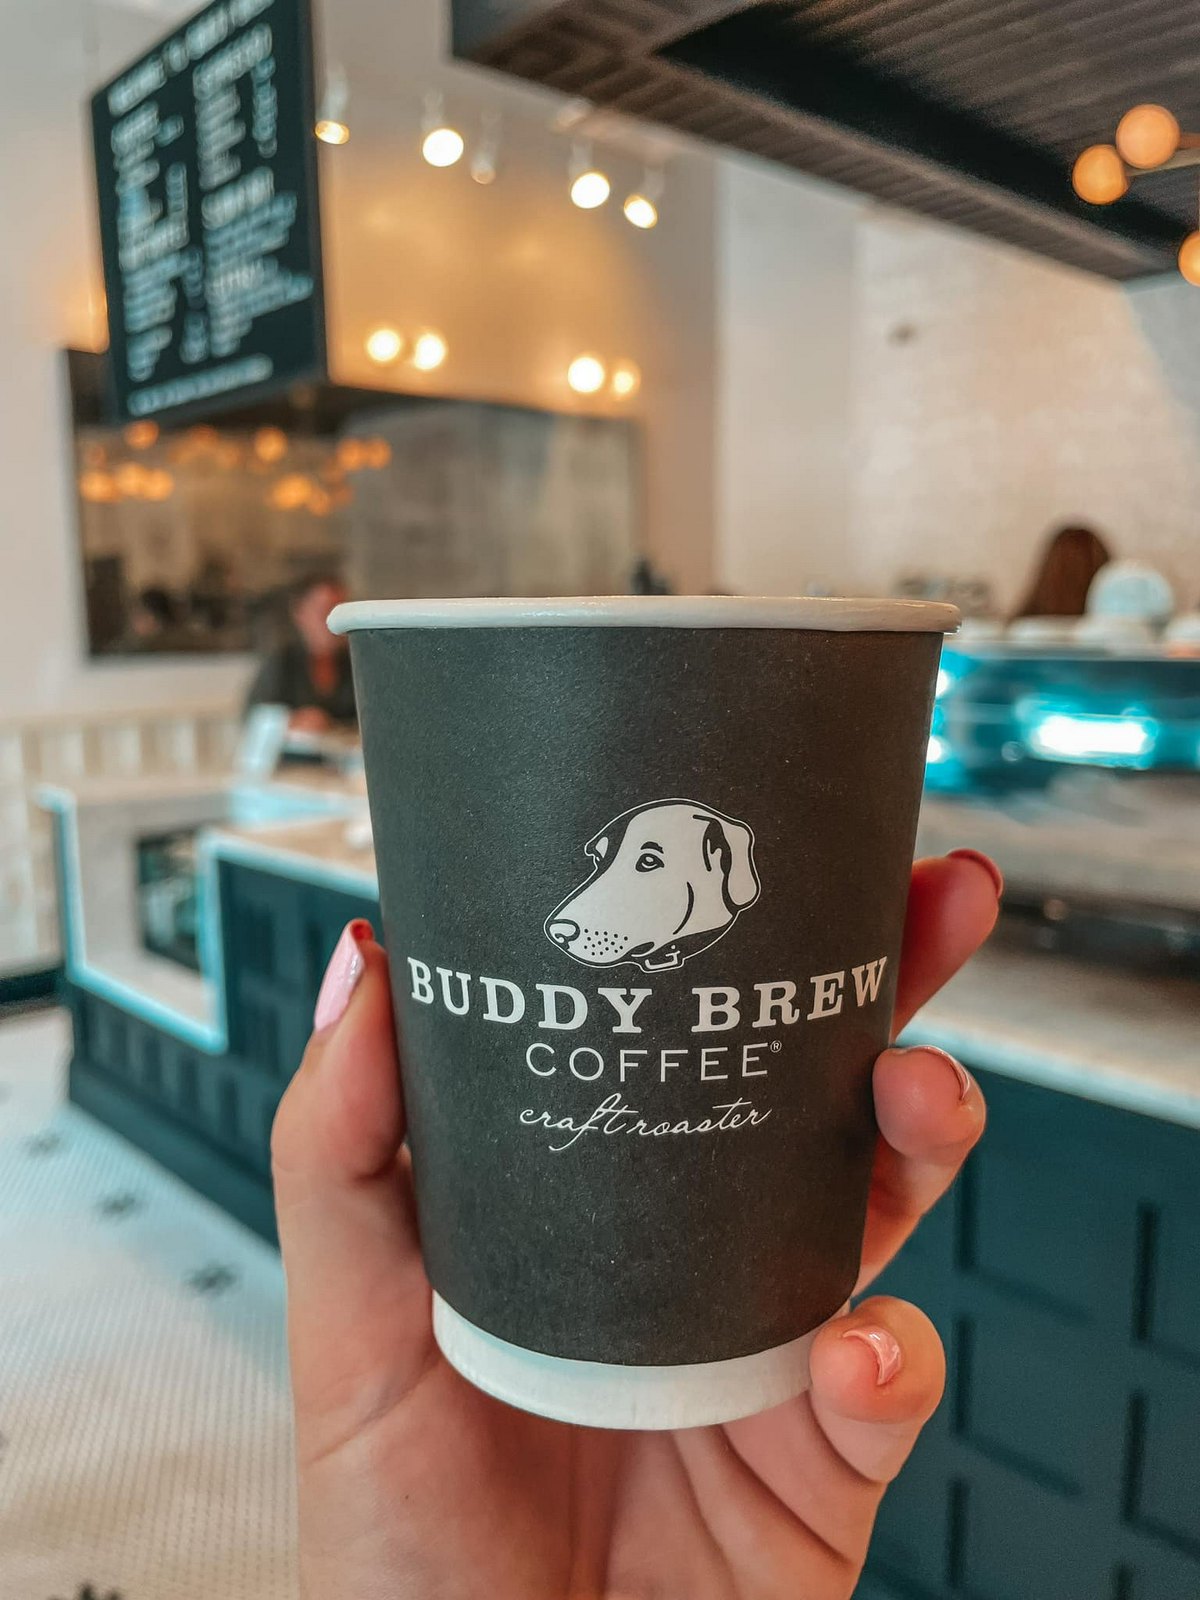 Buddy Brew Coffee at Tampa location